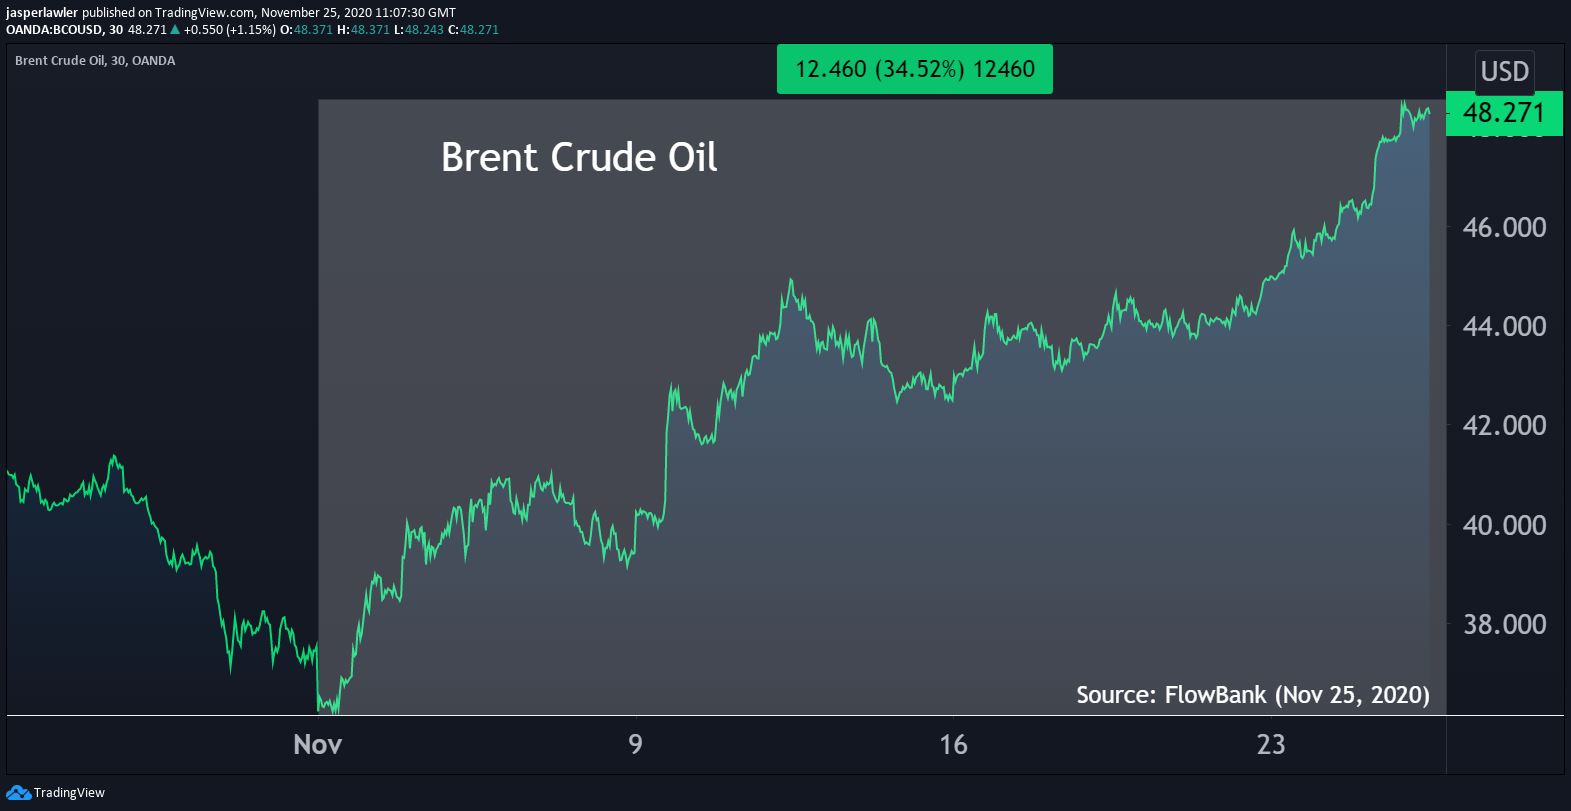 Crude oil has gained over a 3rd in value in November...